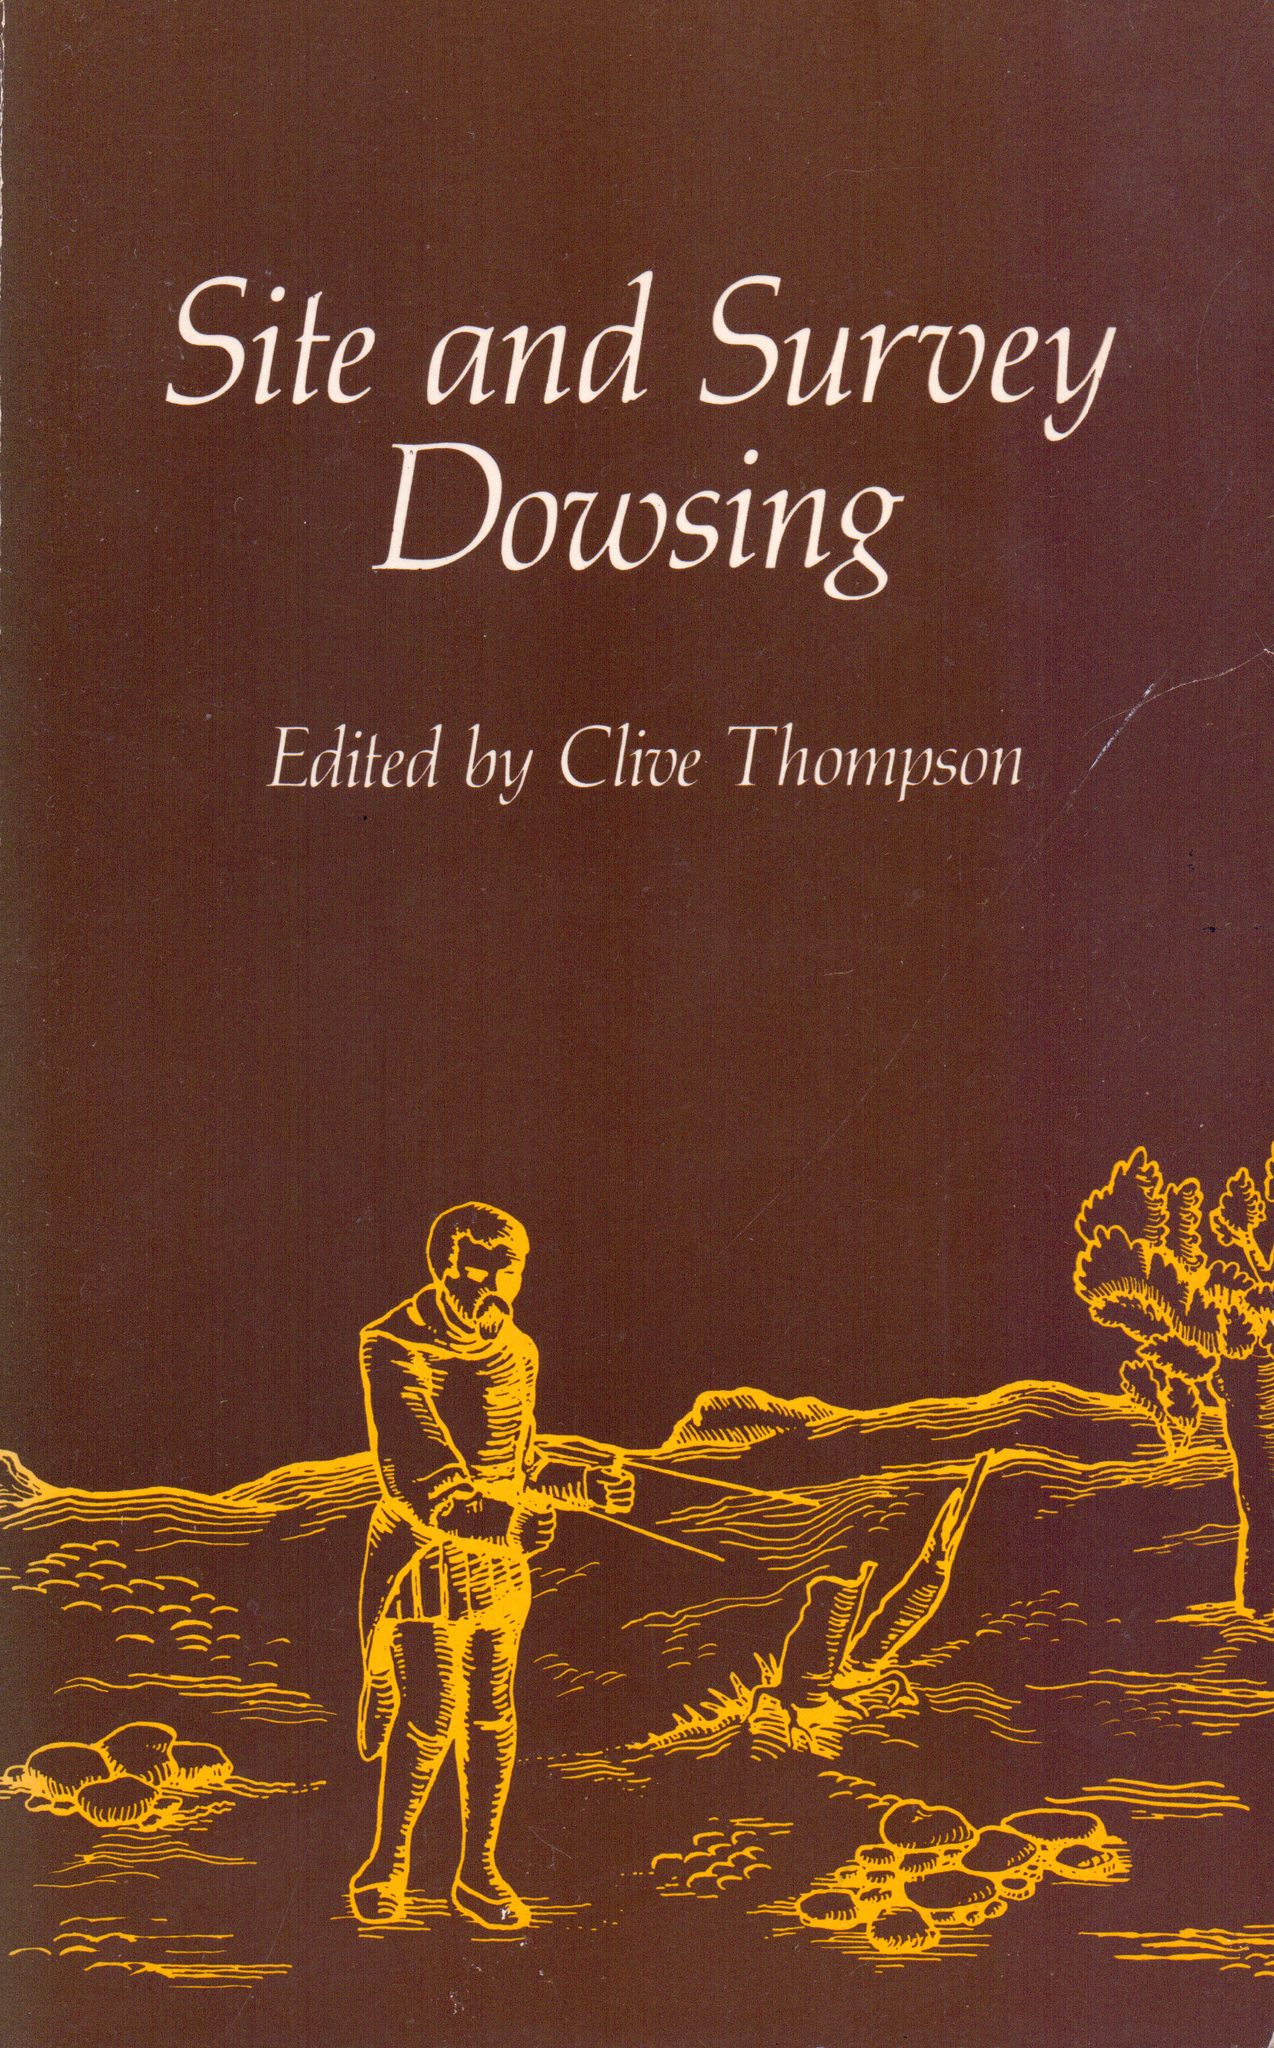 Site and Survey Dowsing, Clive Thompson (SH)